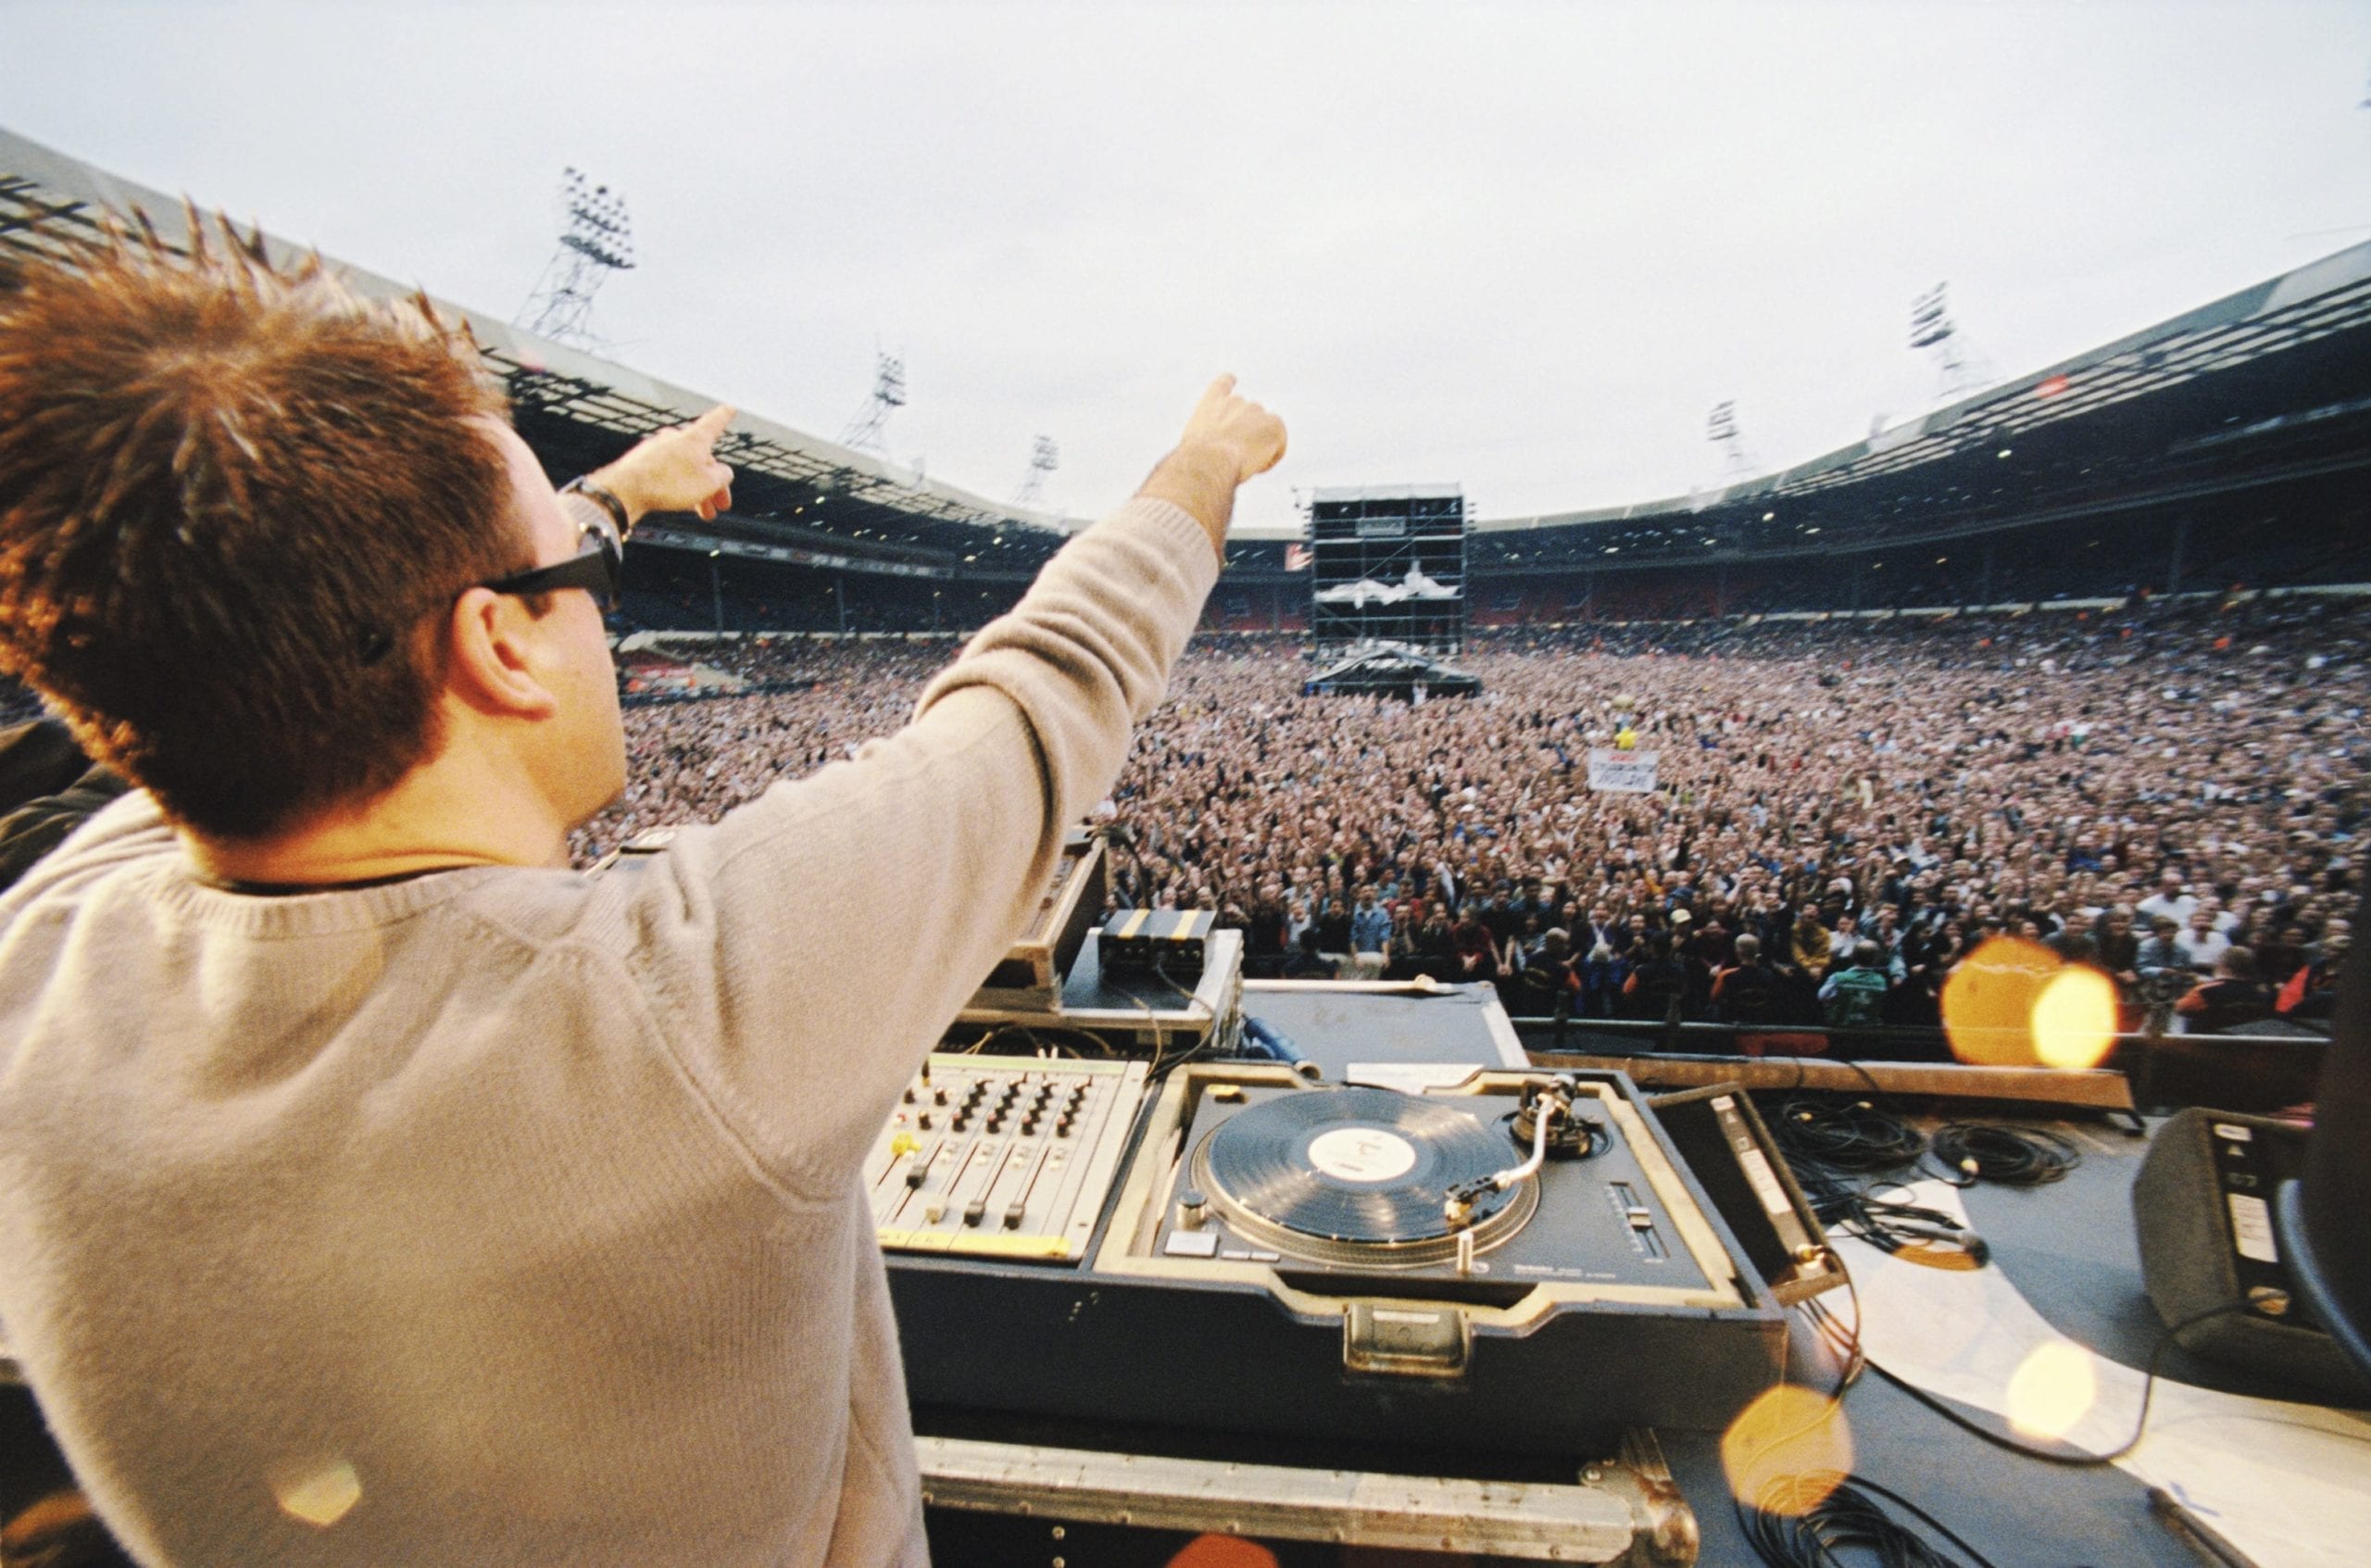 Paul Oakenfold plays to a huge crowd. NetAid - The Old Wembley Stadium, London, 1999 © Grant Fleming